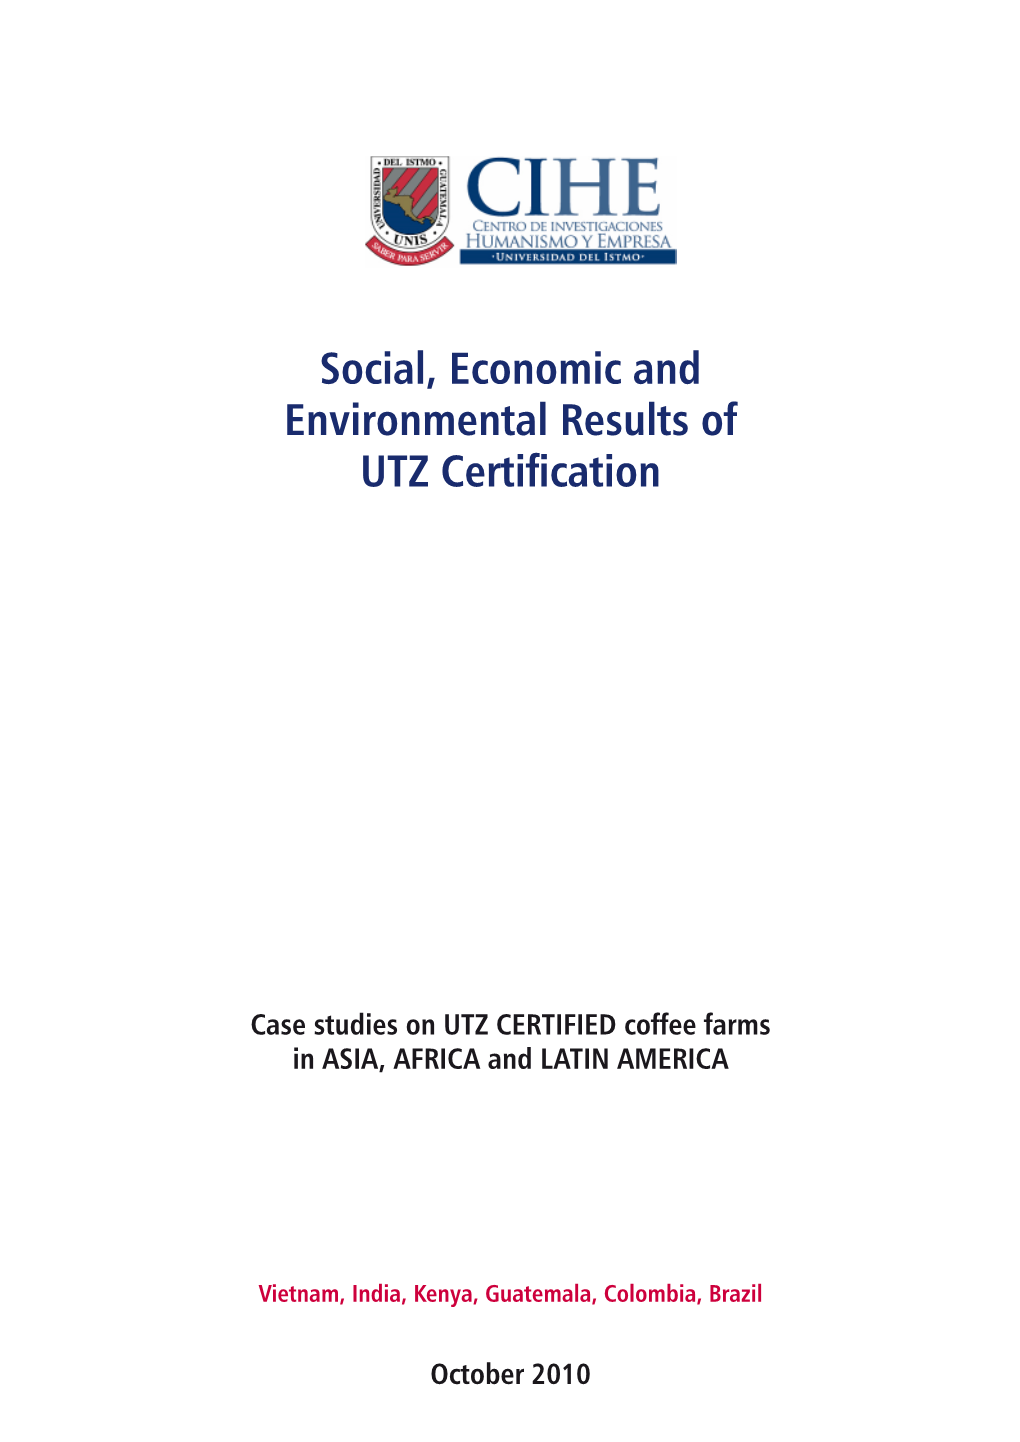 Social, Economic and Environmental Results of UTZ Certification